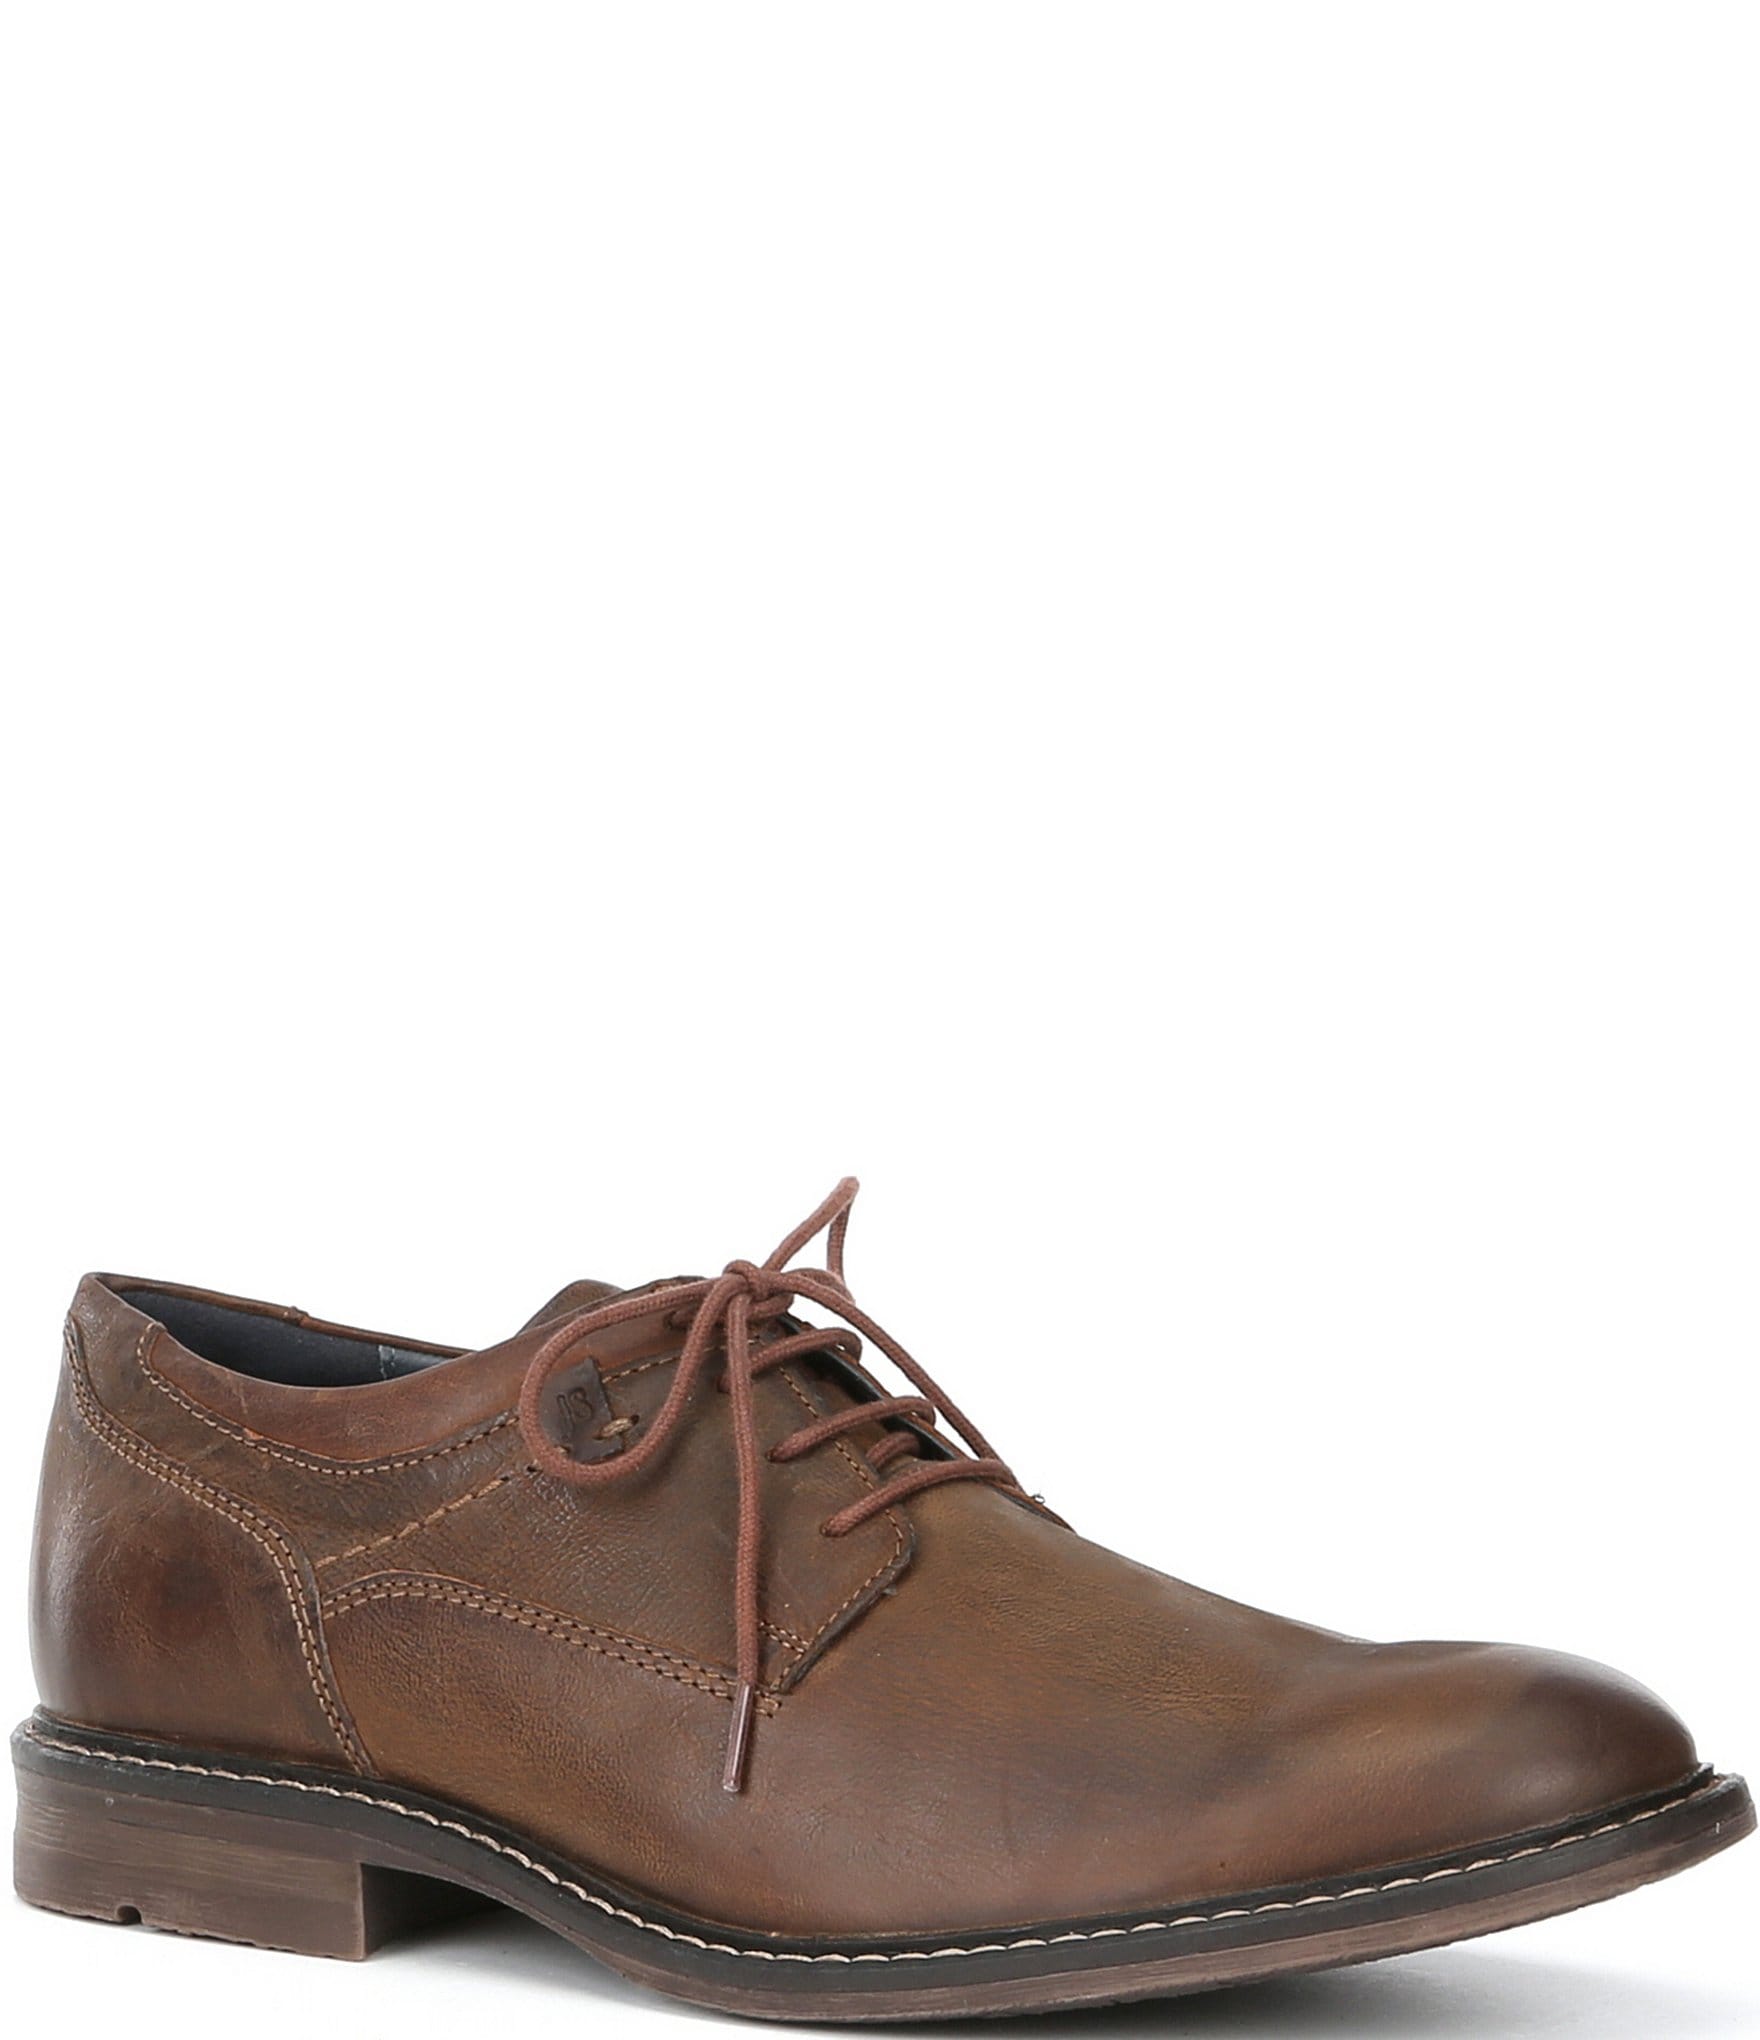 Mens Shoes Lace-ups Oxford shoes for Men Santoni Leather Lace-up Shoes in Camel Natural 